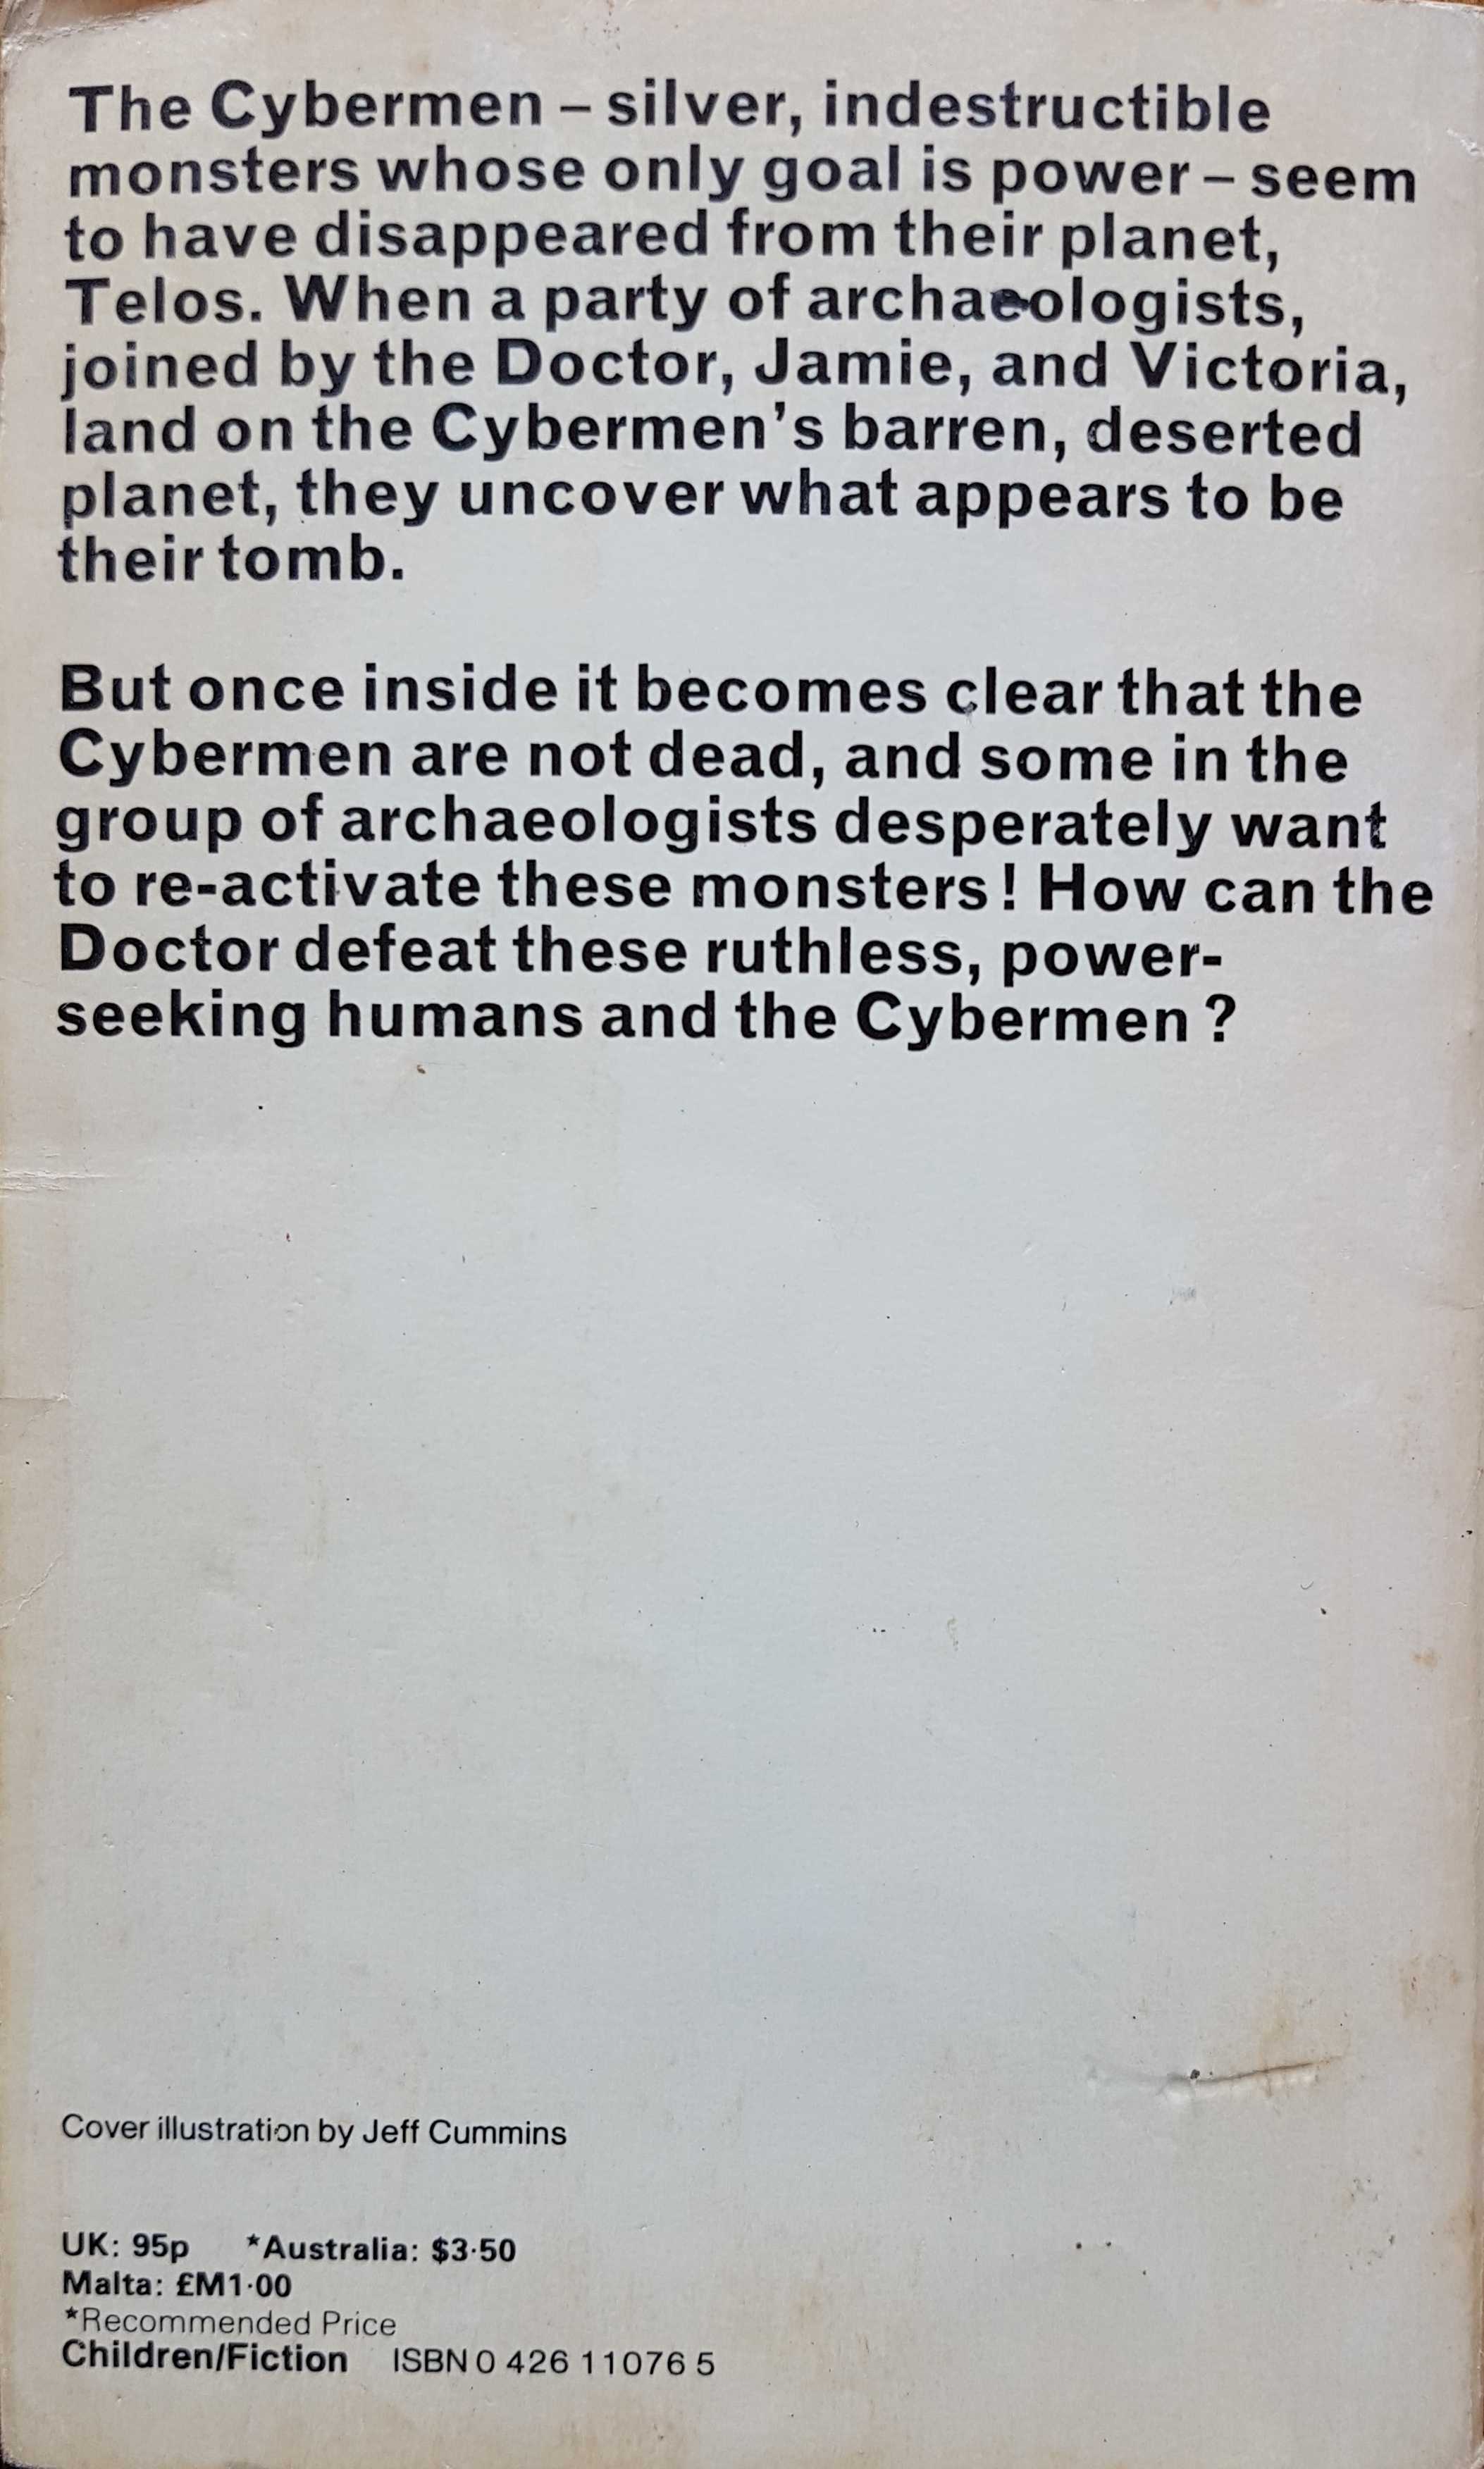 Picture of 0-426-11076-5 Doctor Who - Tomb of the Cybermen by artist Gerry Davis from the BBC records and Tapes library